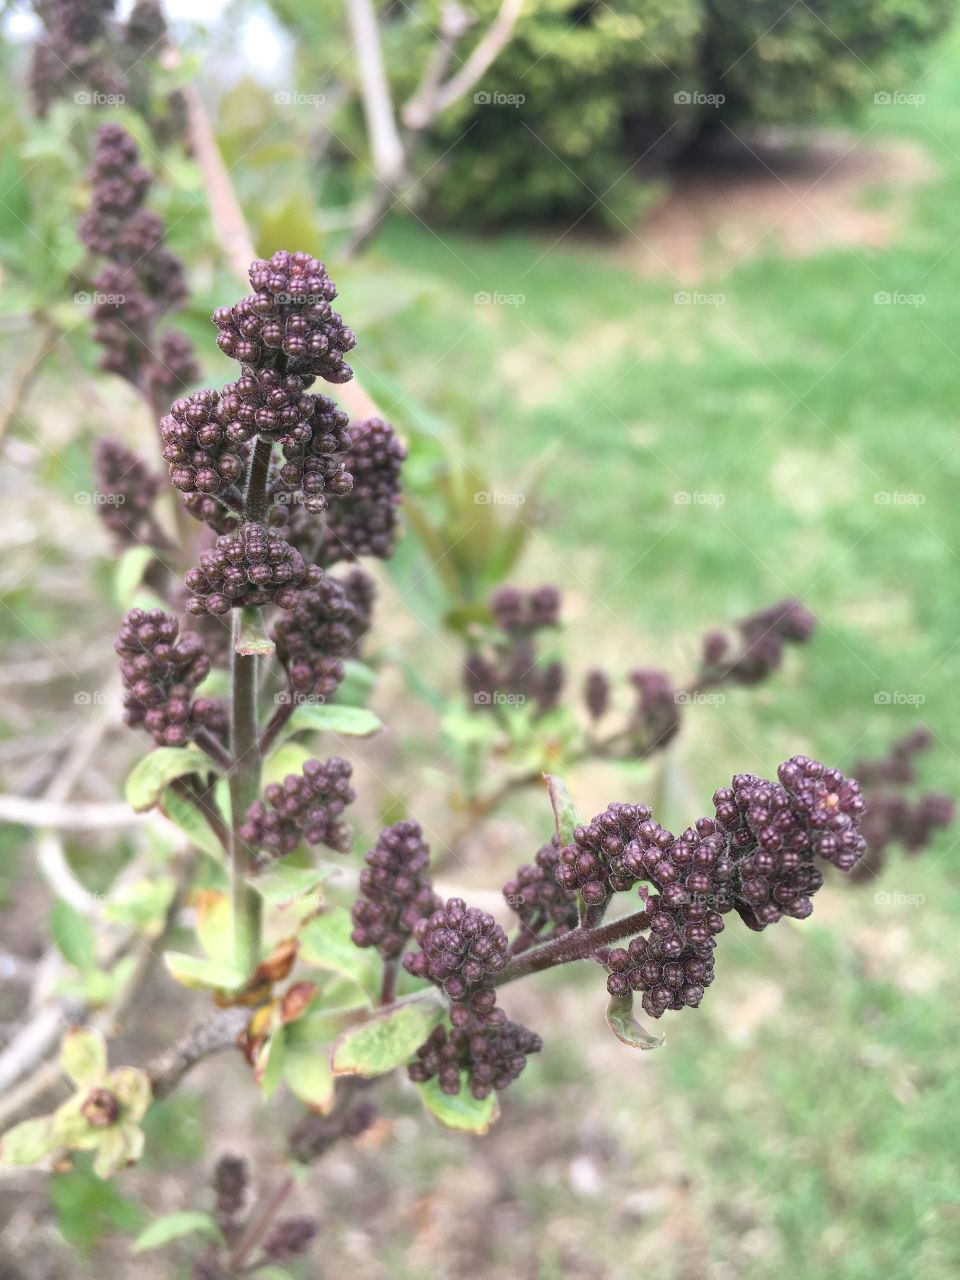 Lilacs starting to wake up from the long winter.